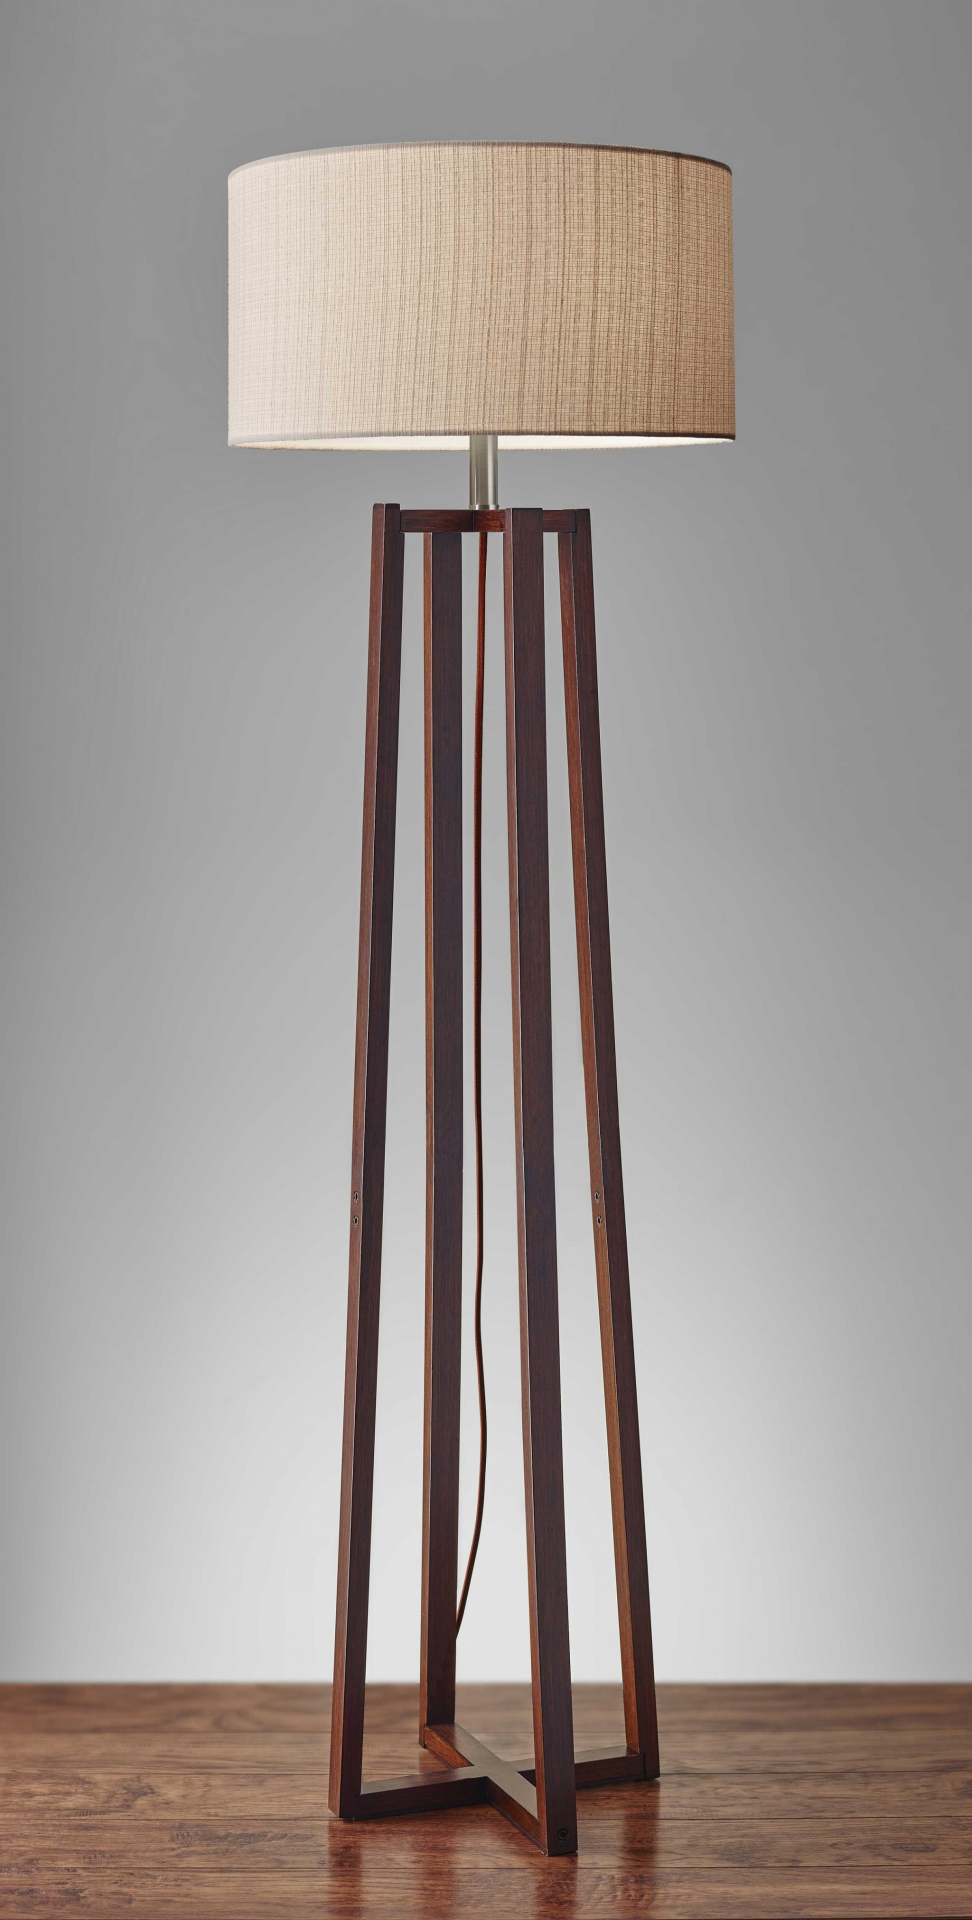 Chic Modern Style Solid Wood Floor Lamp (60"H)